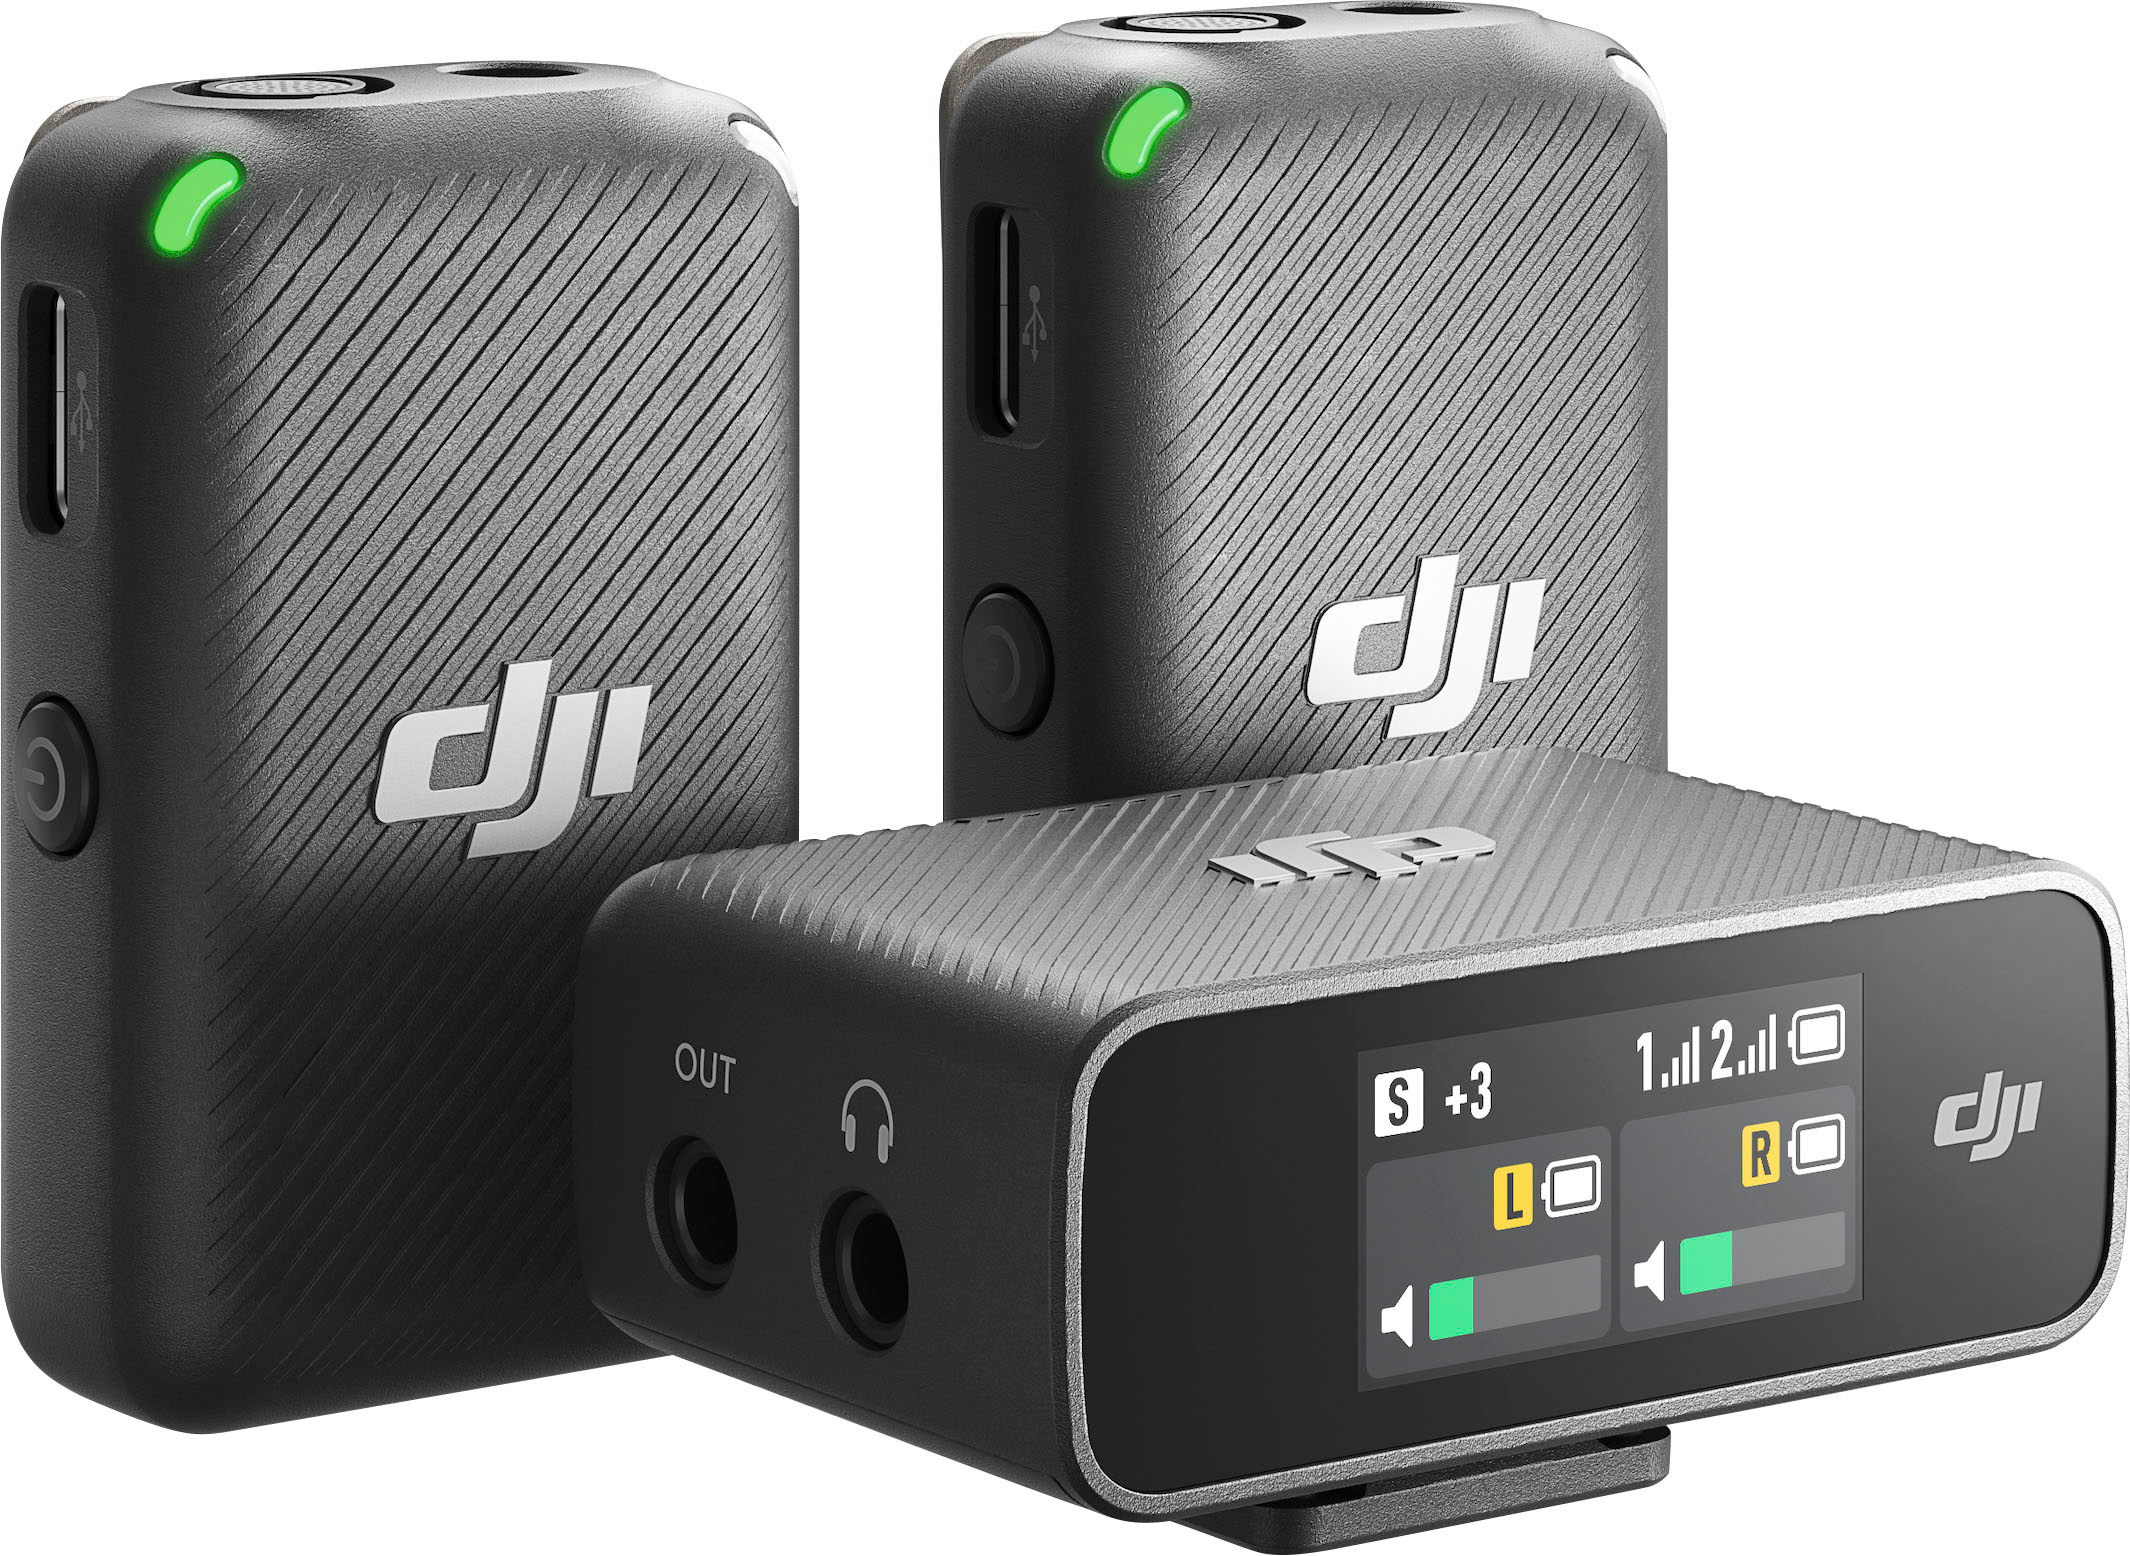 Best　Microphone　Dual-Channel　Mic　Wireless　Buy:　with　Recording　DJI　Lavalier